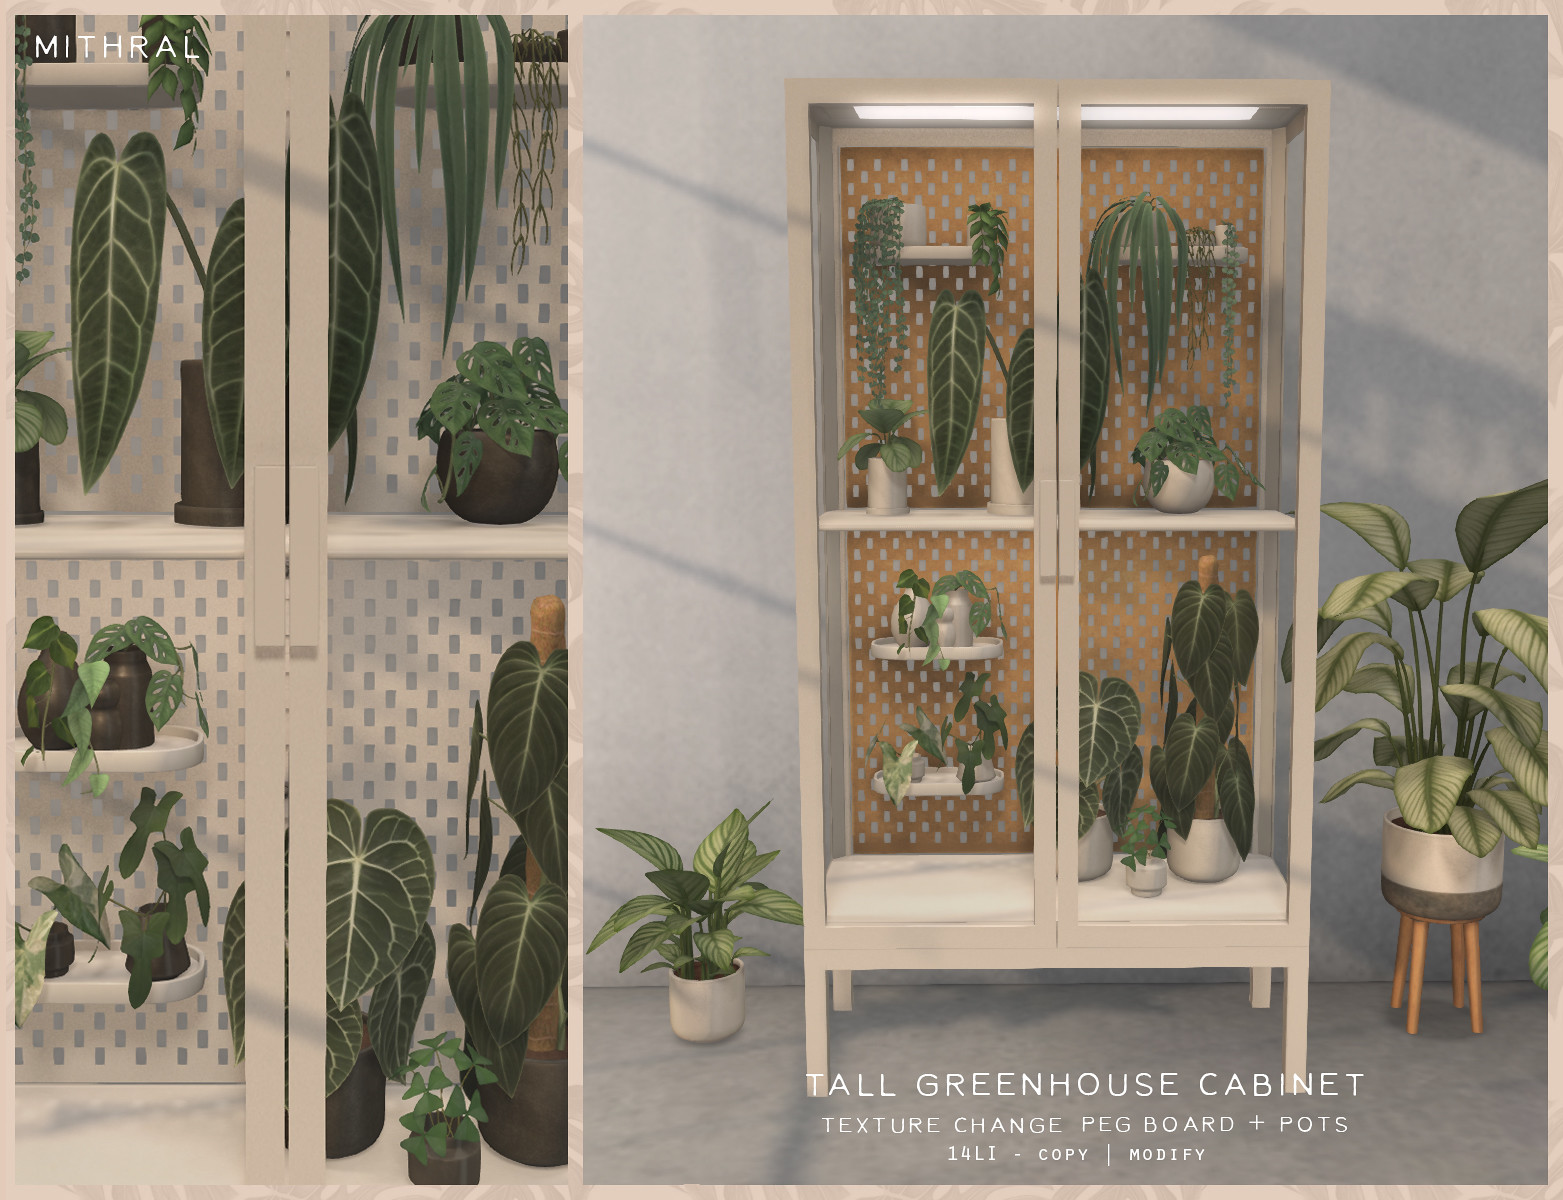 Mithral Apothecary – Tall Greenhouse Cabinet